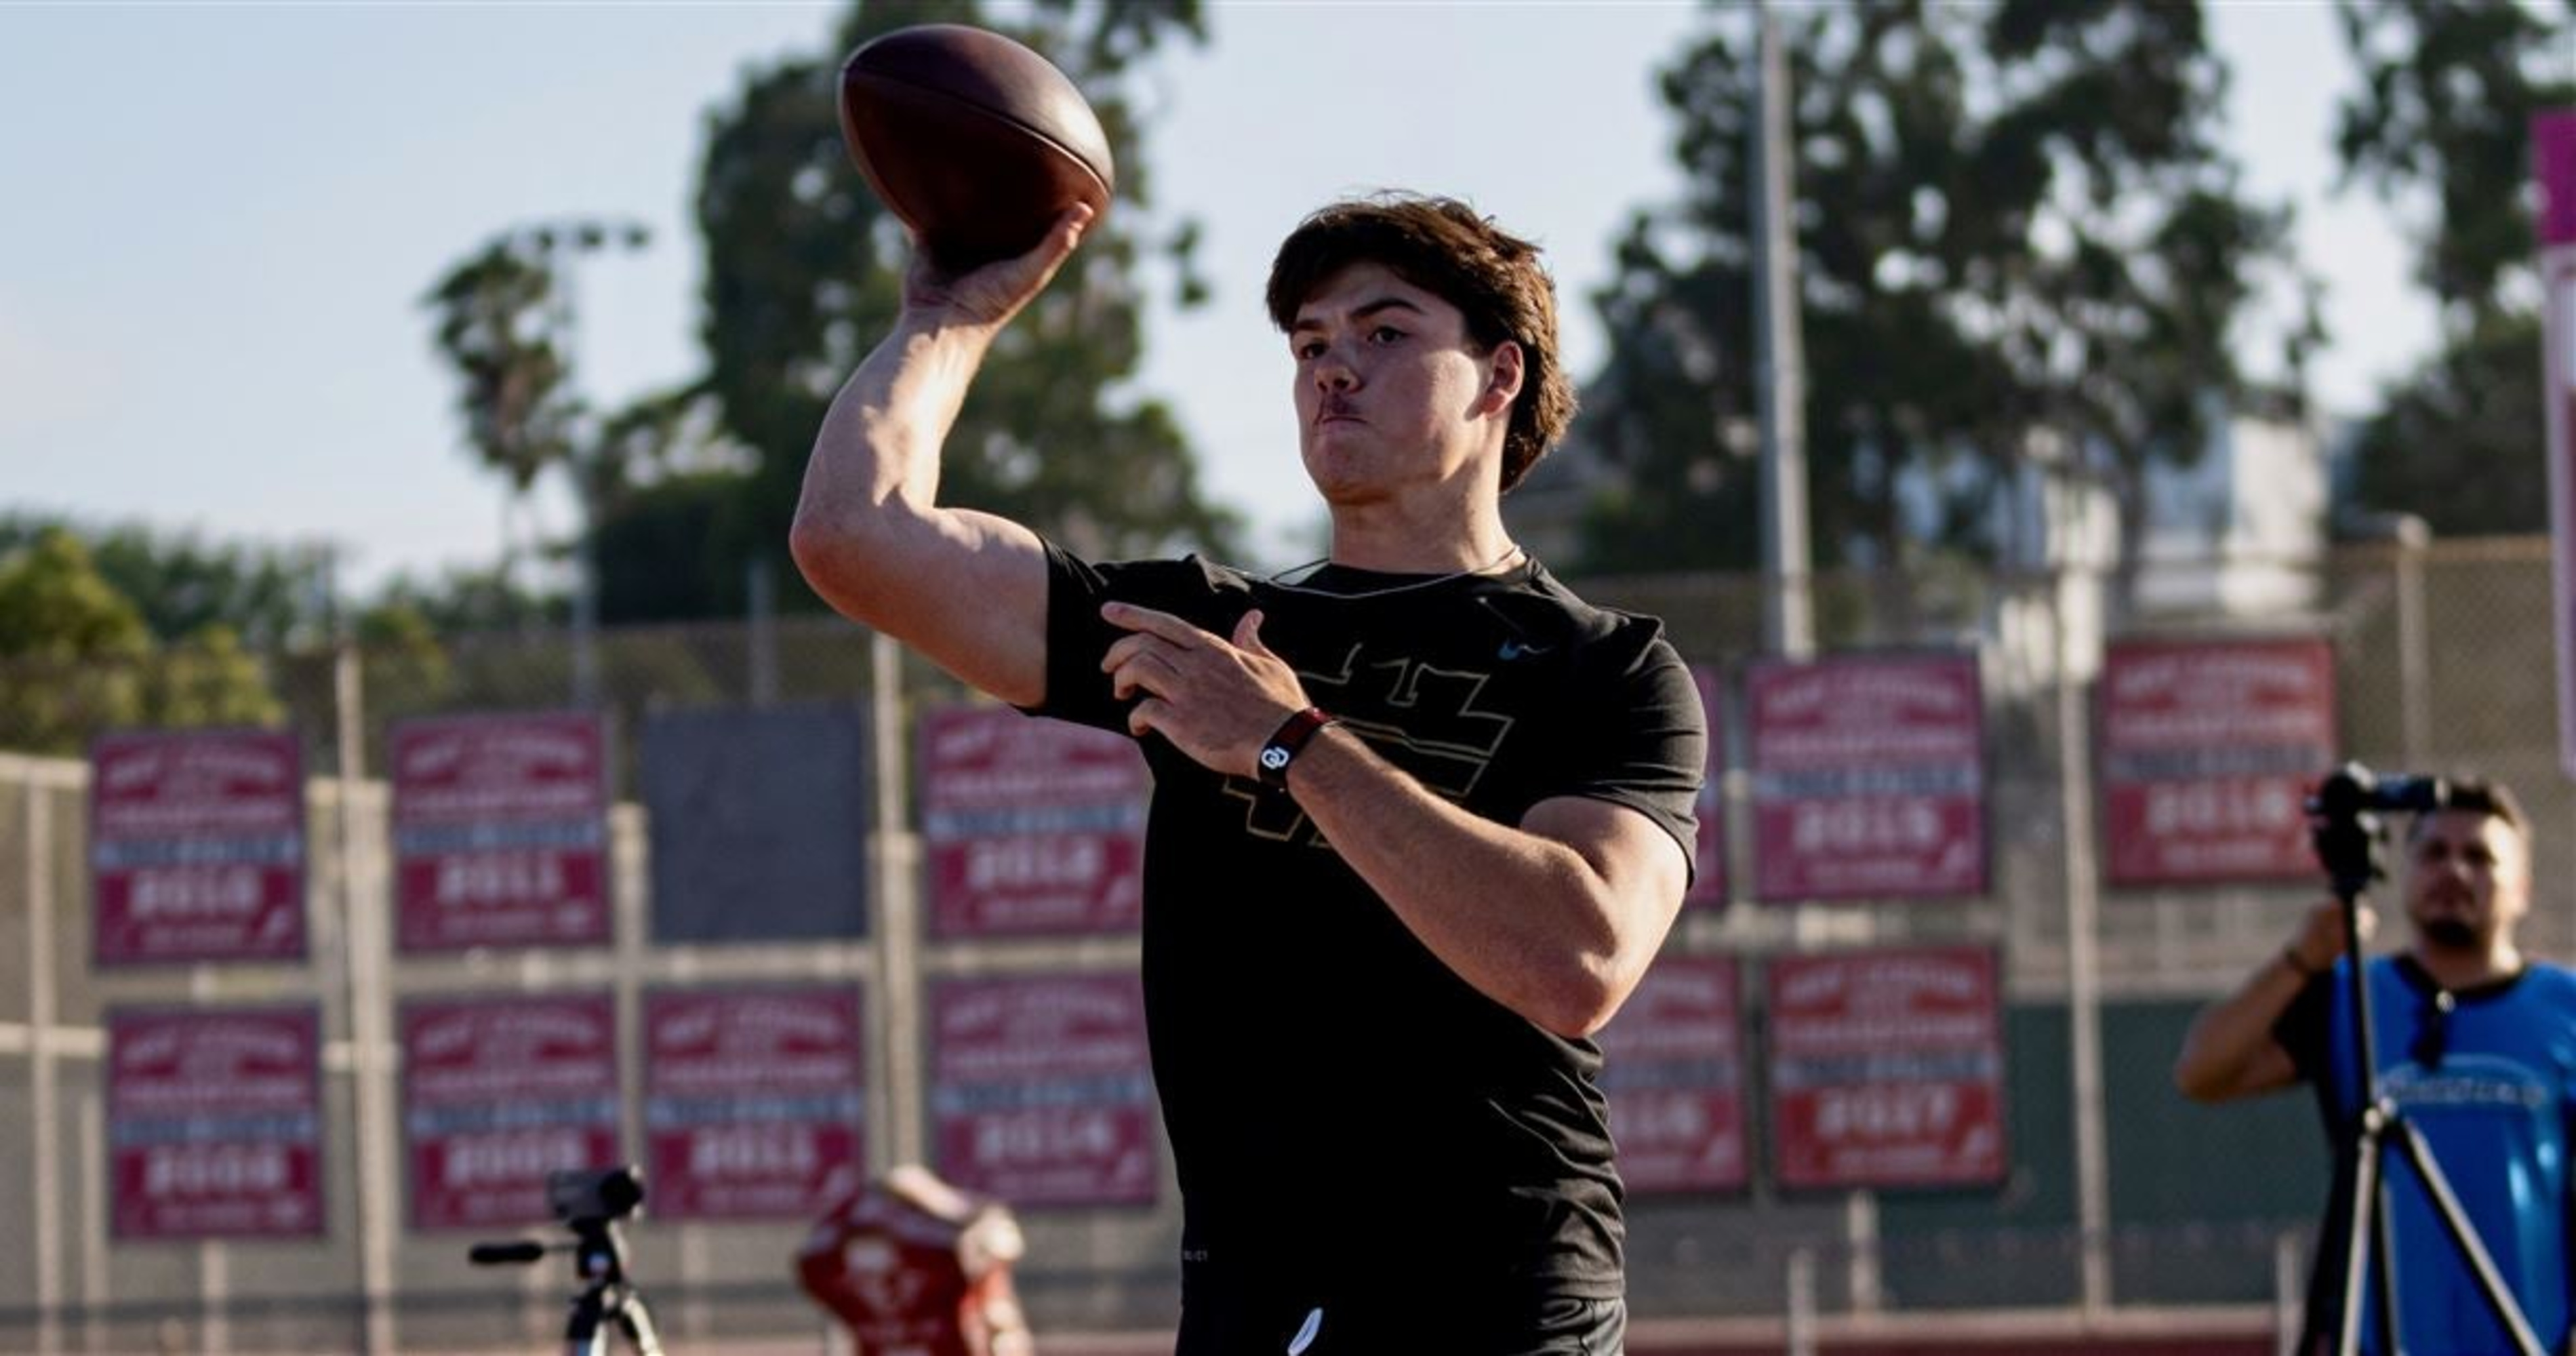 Elite 11 Finals 2022 Results: Oklahoma Commit Jackson Arnold Named